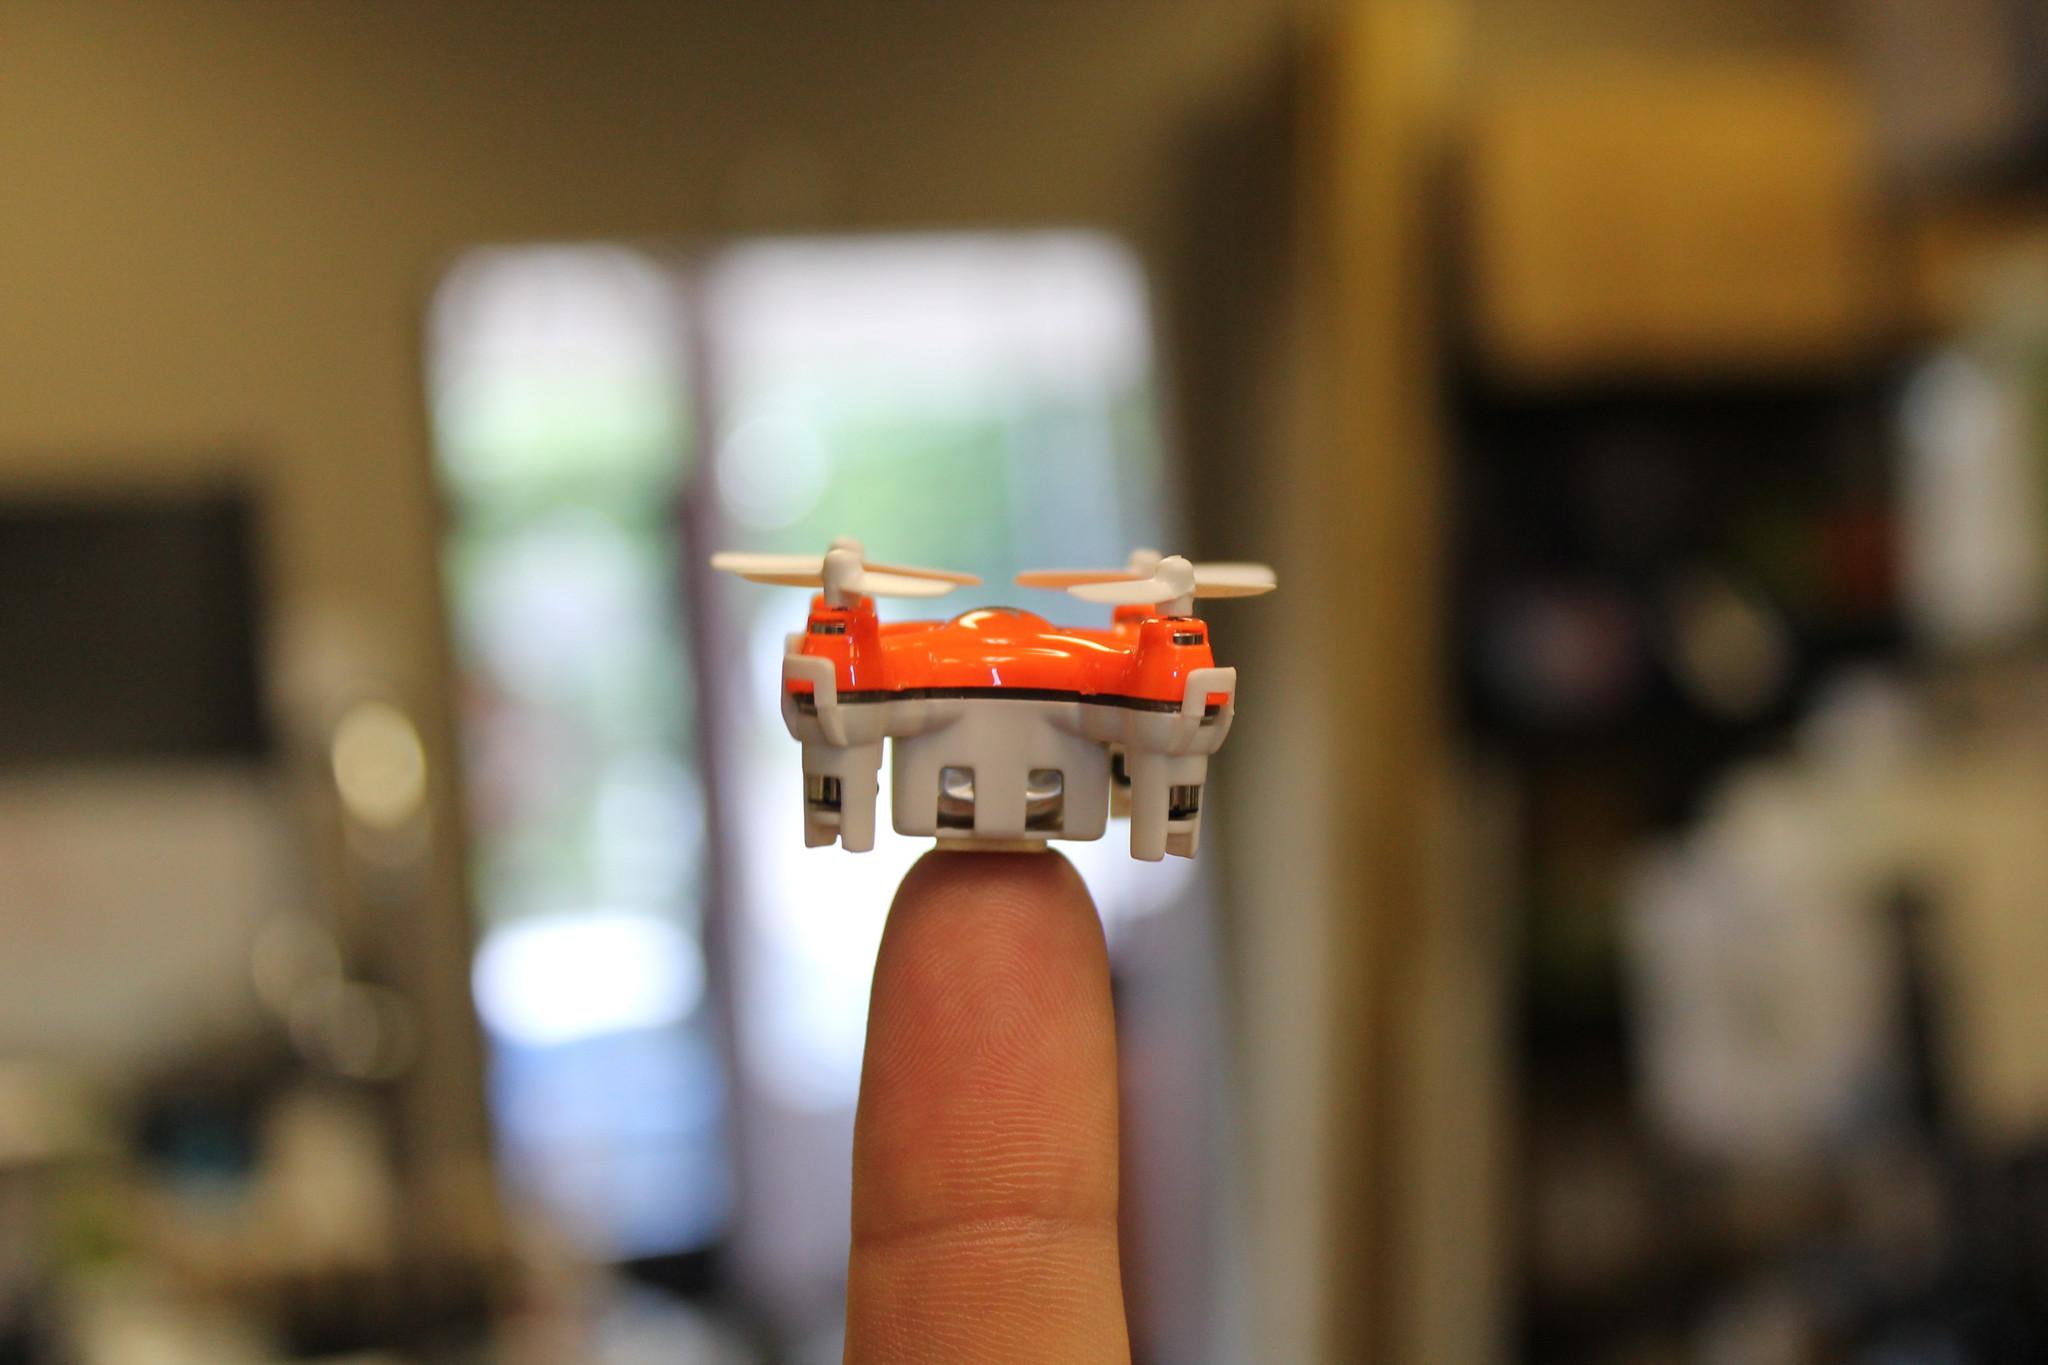 worlds smallest drone aerius 2015 img 4175